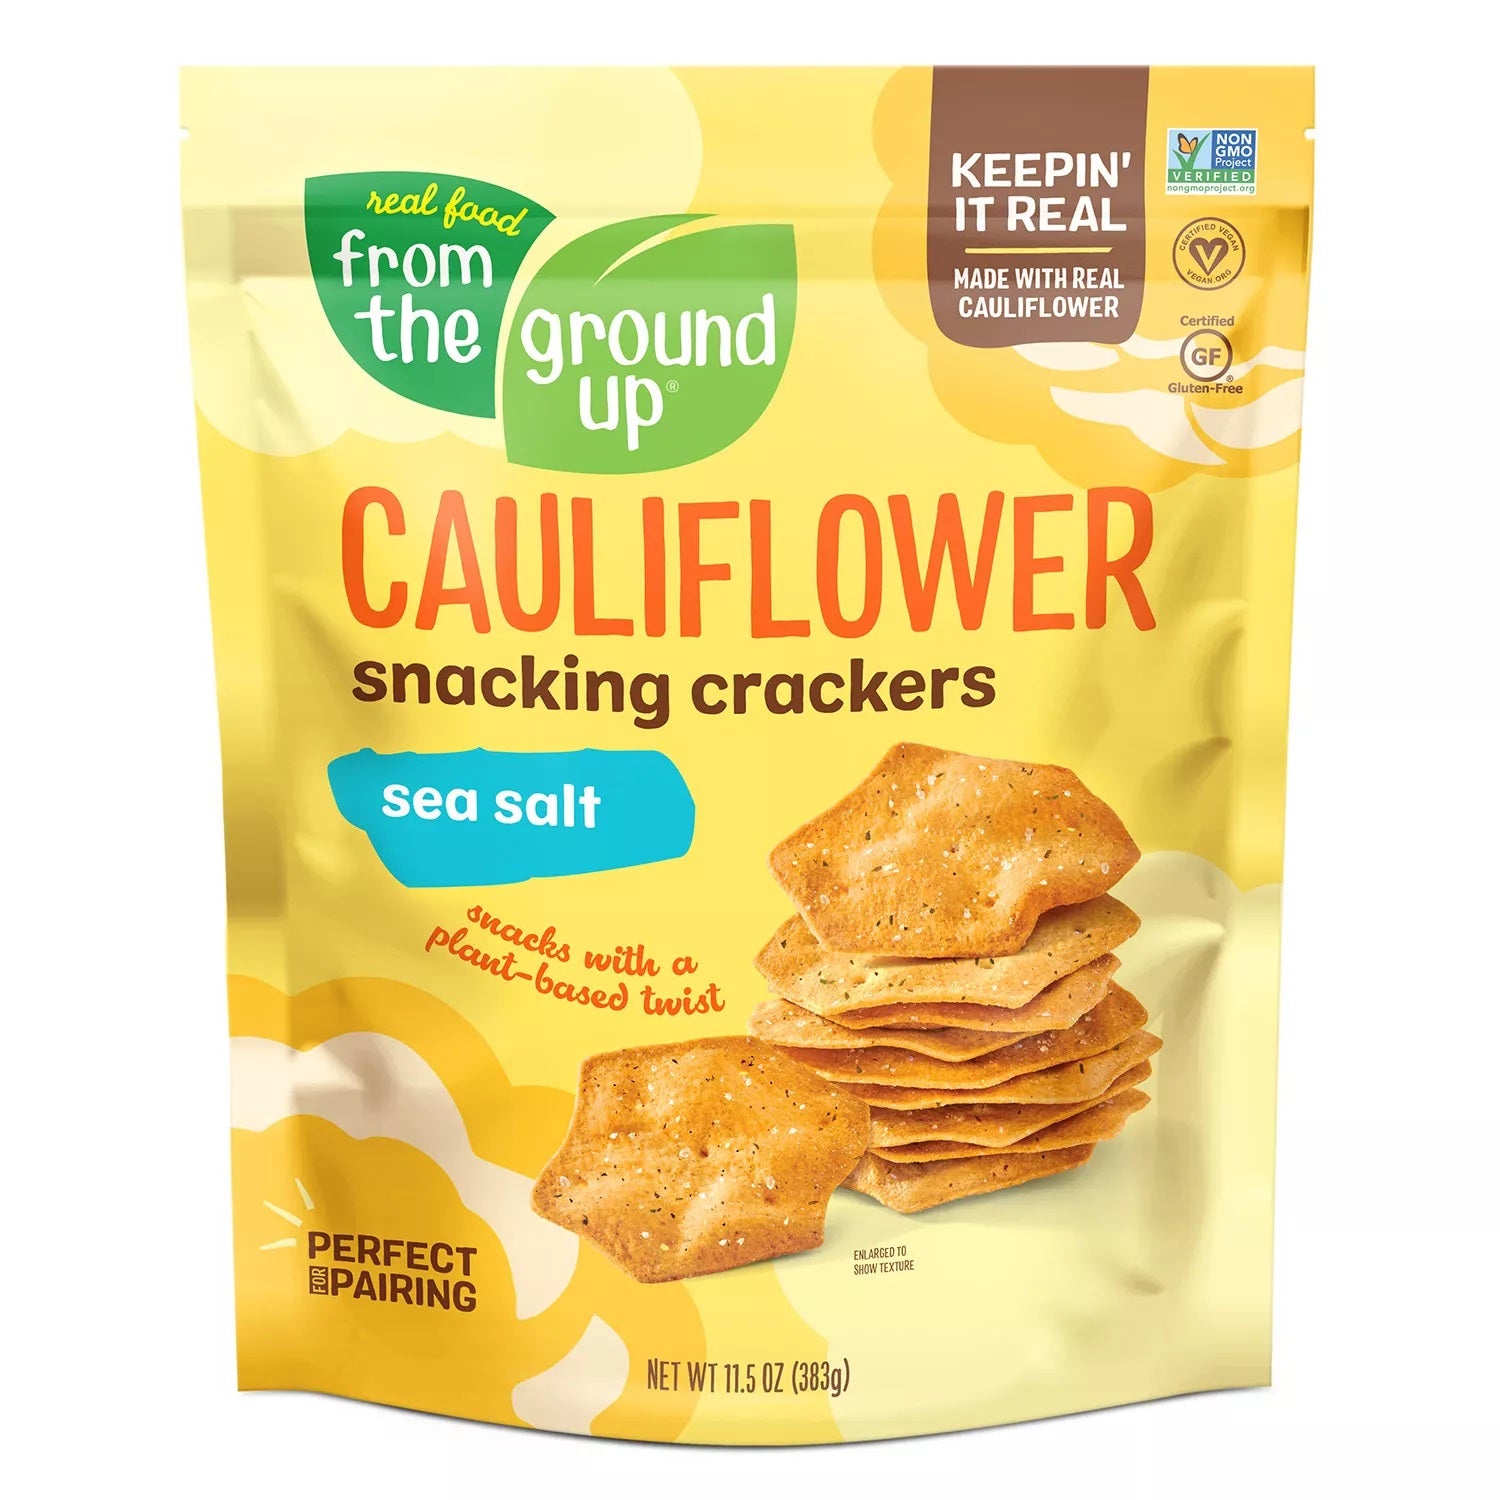 Real Food From The Ground Up Cauliflower Sea Salt Snacking Crackers